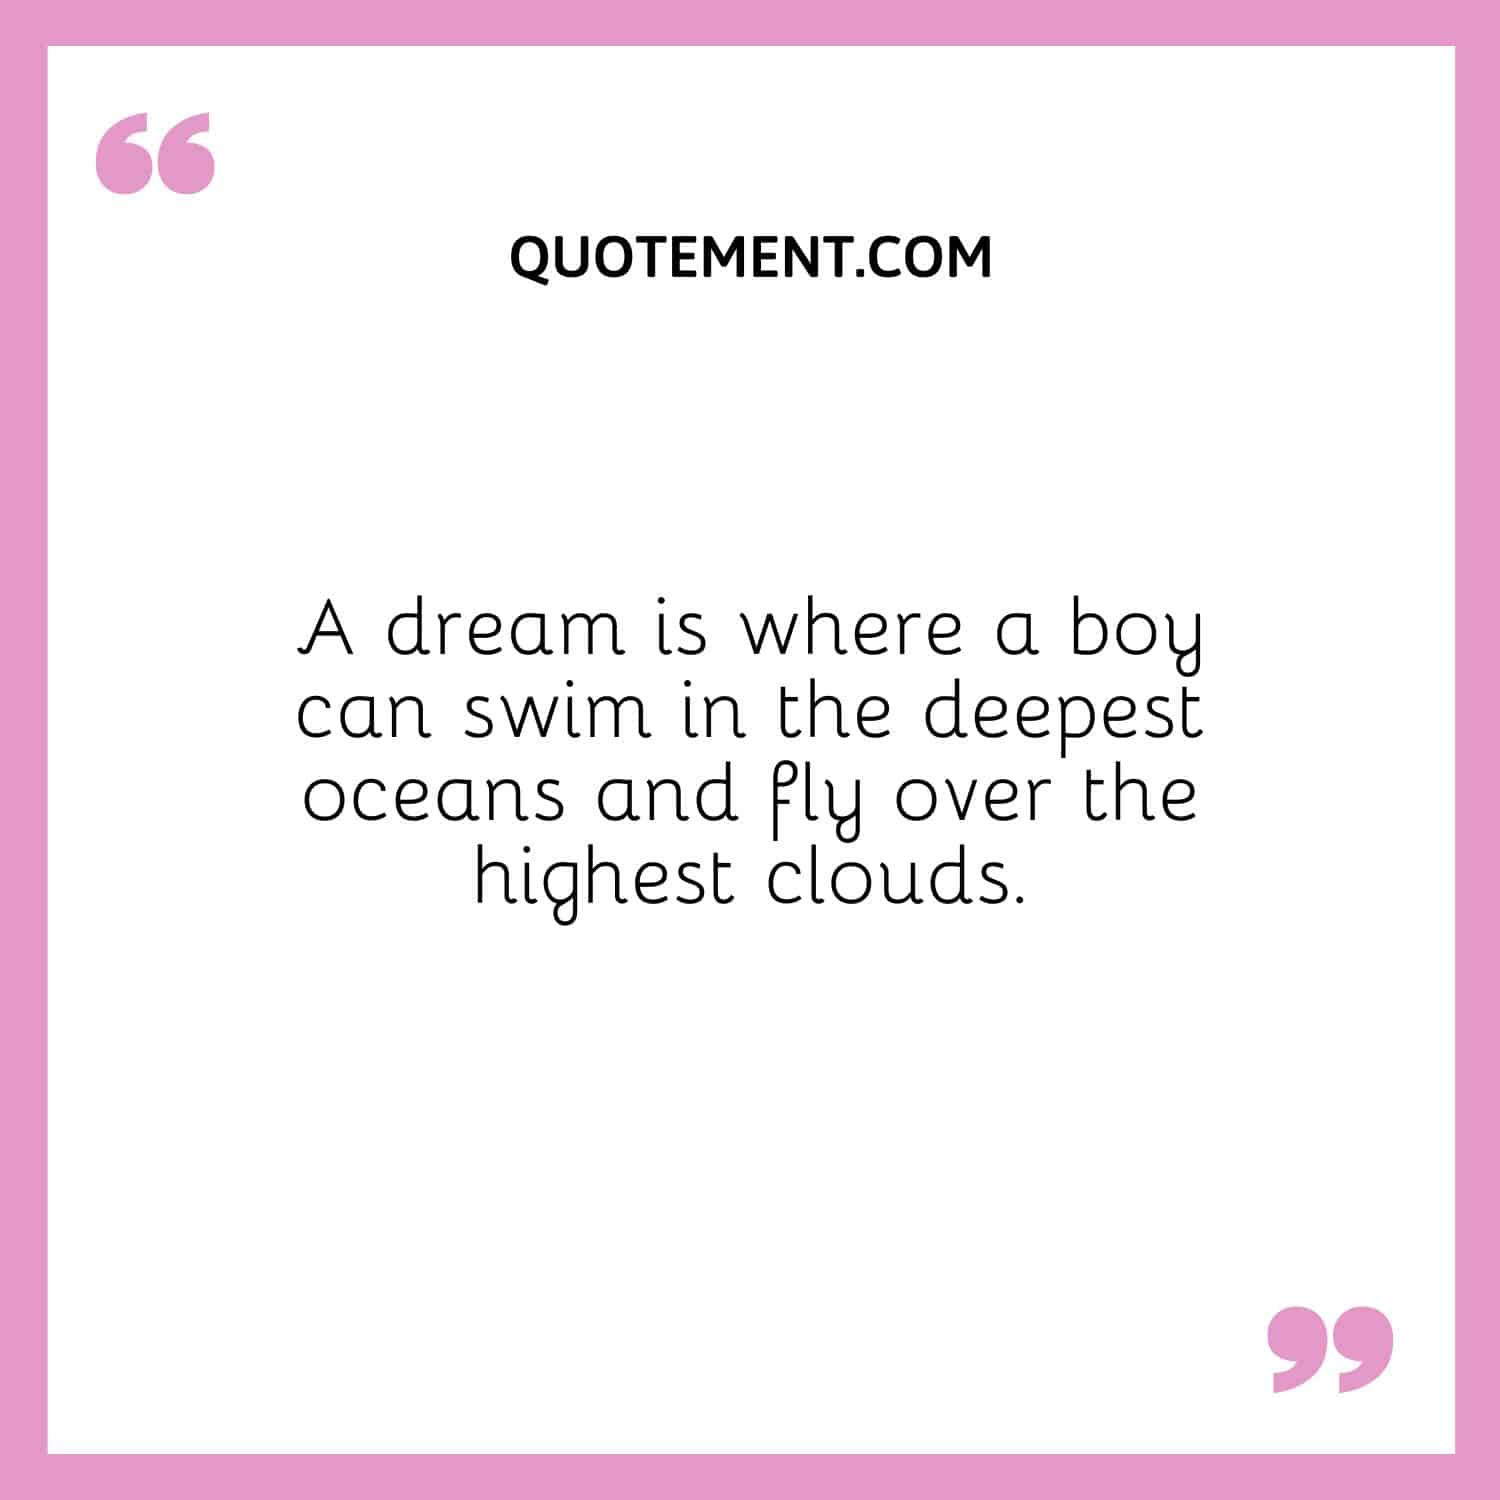 A dream is where a boy can swim in the deepest oceans and fly over the highest clouds.